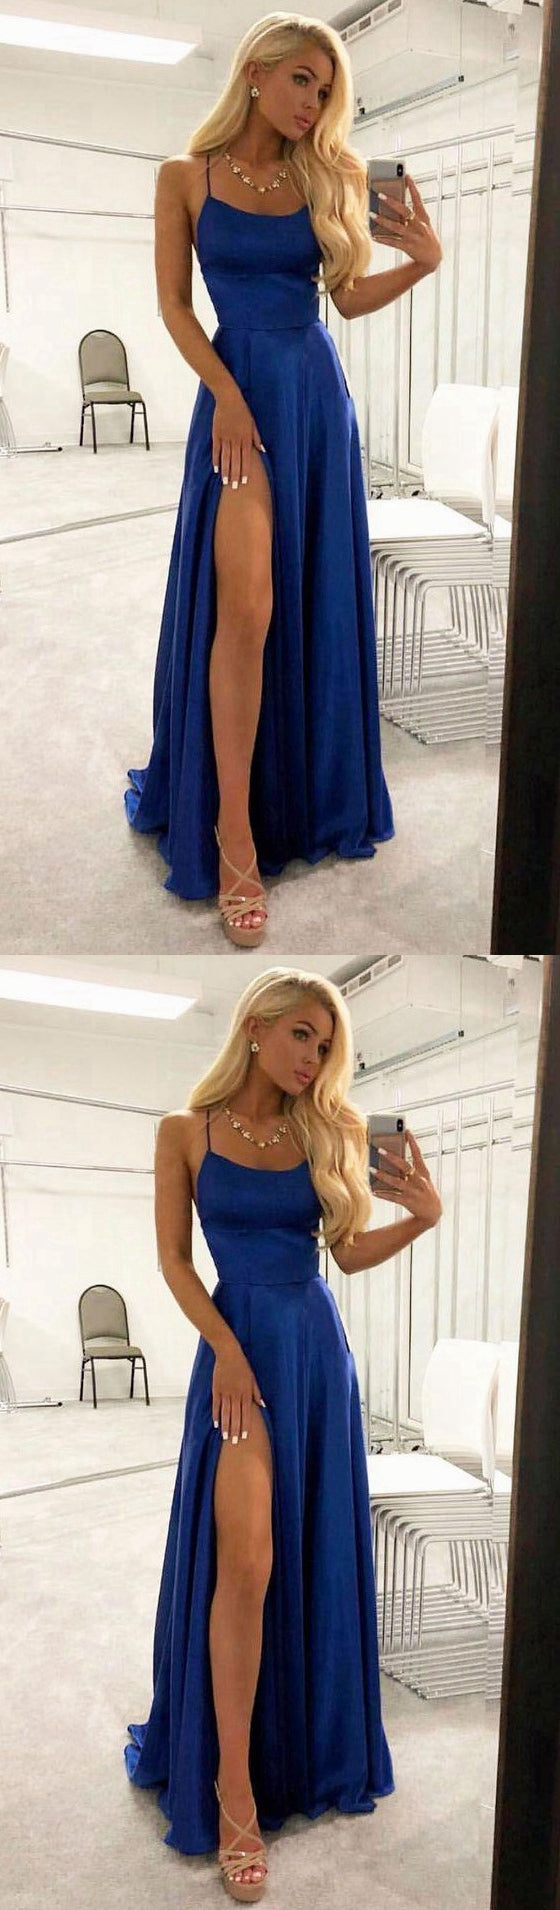 Royal Blue Sexy Prom Dress with Slit, Evening Dress ,Winter Formal Dress, Pageant Dance Dresses, Graduation School Party Gown, PC0163 - Promcoming